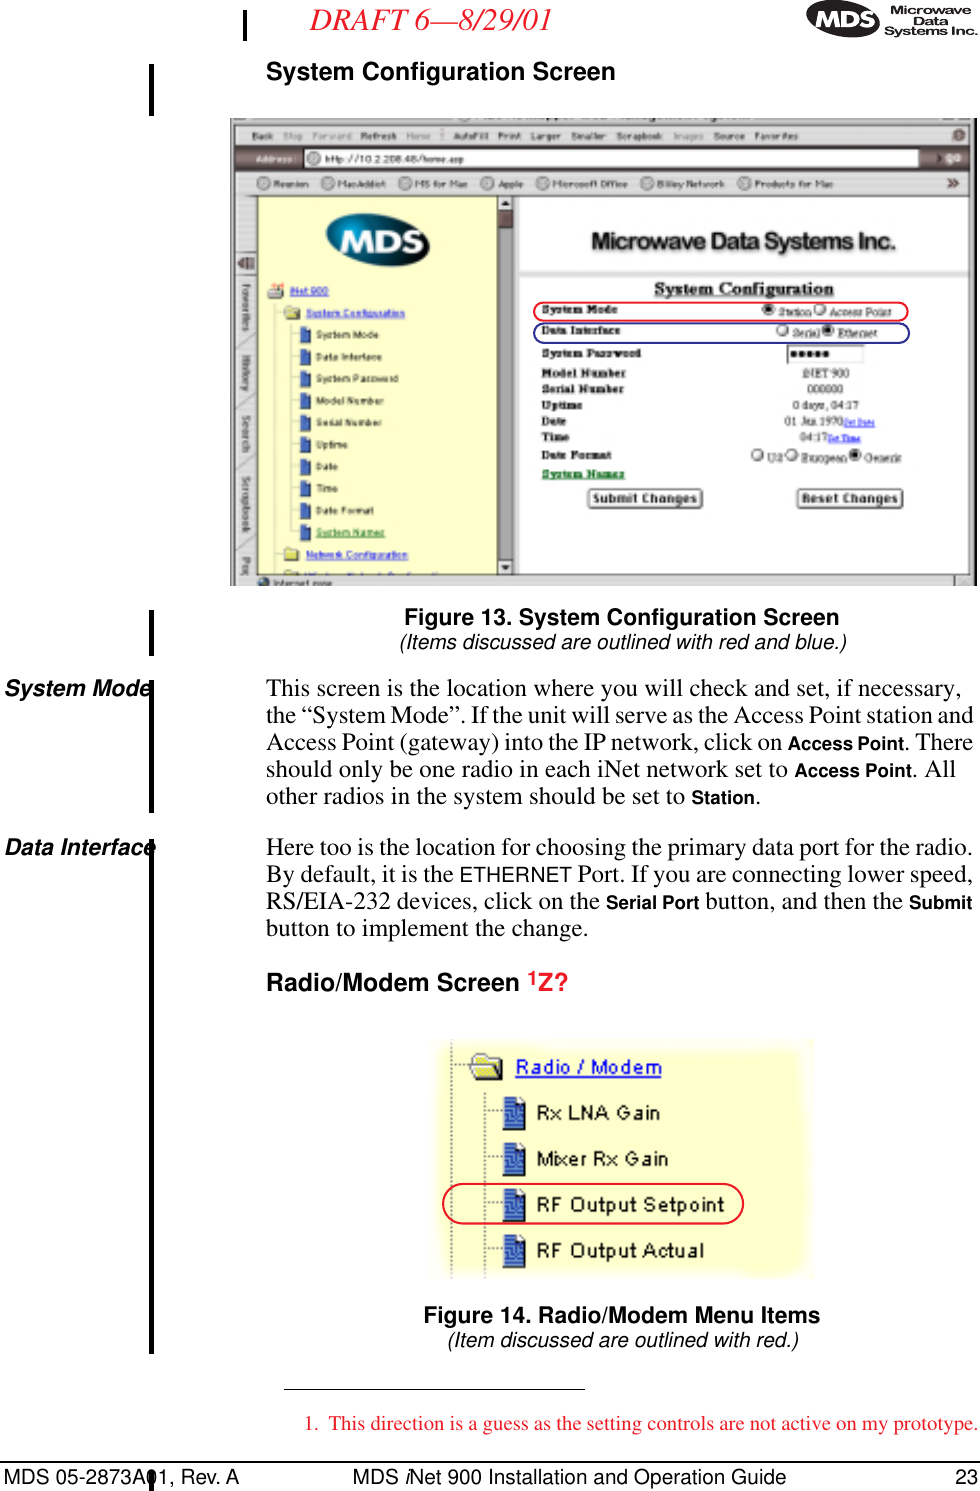 MDS 05-2873A01, Rev. A MDS iNet 900 Installation and Operation Guide 23DRAFT 6—8/29/01System Configuration Screen Invisible place holderFigure 13. System Configuration Screen(Items discussed are outlined with red and blue.)System Mode This screen is the location where you will check and set, if necessary, the “System Mode”. If the unit will serve as the Access Point station and Access Point (gateway) into the IP network, click on Access Point. There should only be one radio in each iNet network set to Access Point. All other radios in the system should be set to Station.Data Interface Here too is the location for choosing the primary data port for the radio. By default, it is the ETHERNET Port. If you are connecting lower speed, RS/EIA-232 devices, click on the Serial Port button, and then the Submit button to implement the change.Radio/Modem Screen 1Z? Invisible place holderFigure 14. Radio/Modem Menu Items(Item discussed are outlined with red.)1. This direction is a guess as the setting controls are not active on my prototype.